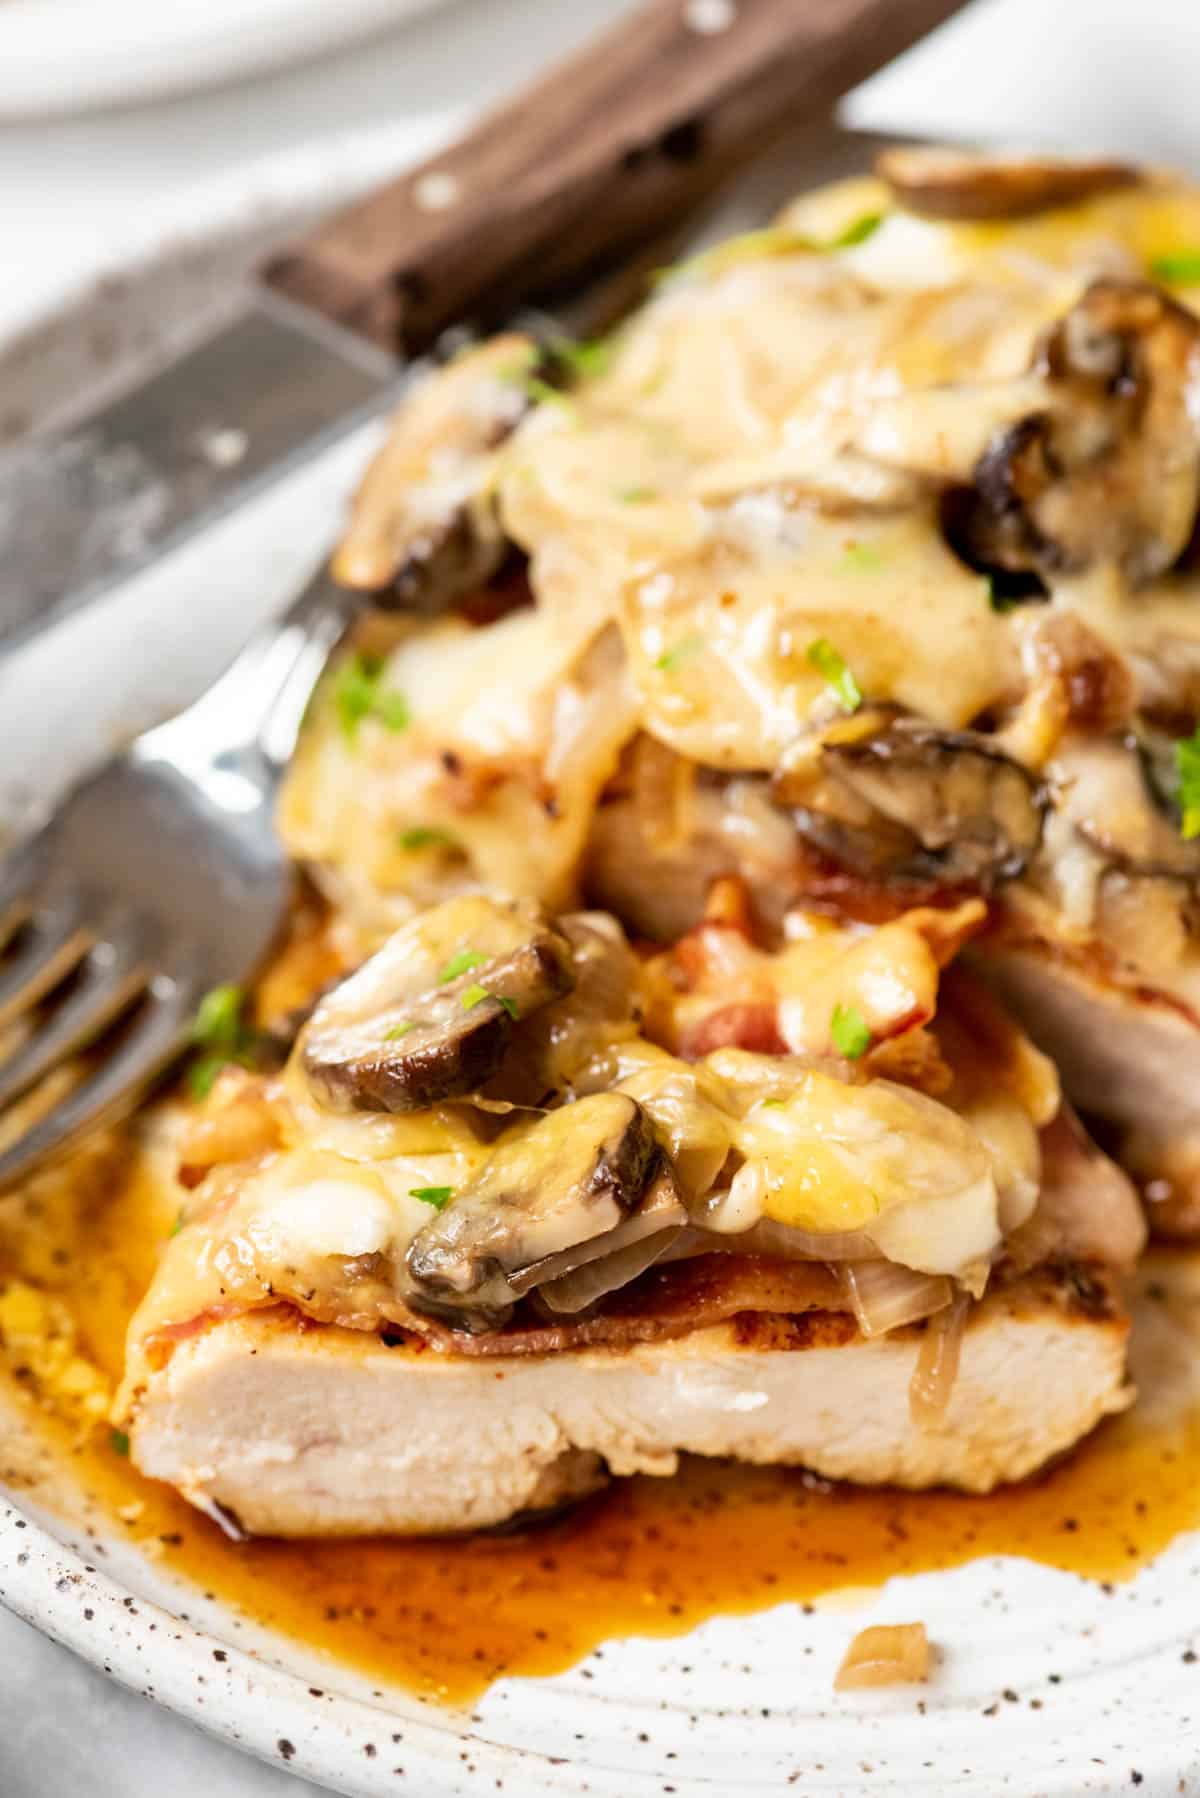 A slice of moist chicken breast topped with melted cheese, mushrooms, and bacon.